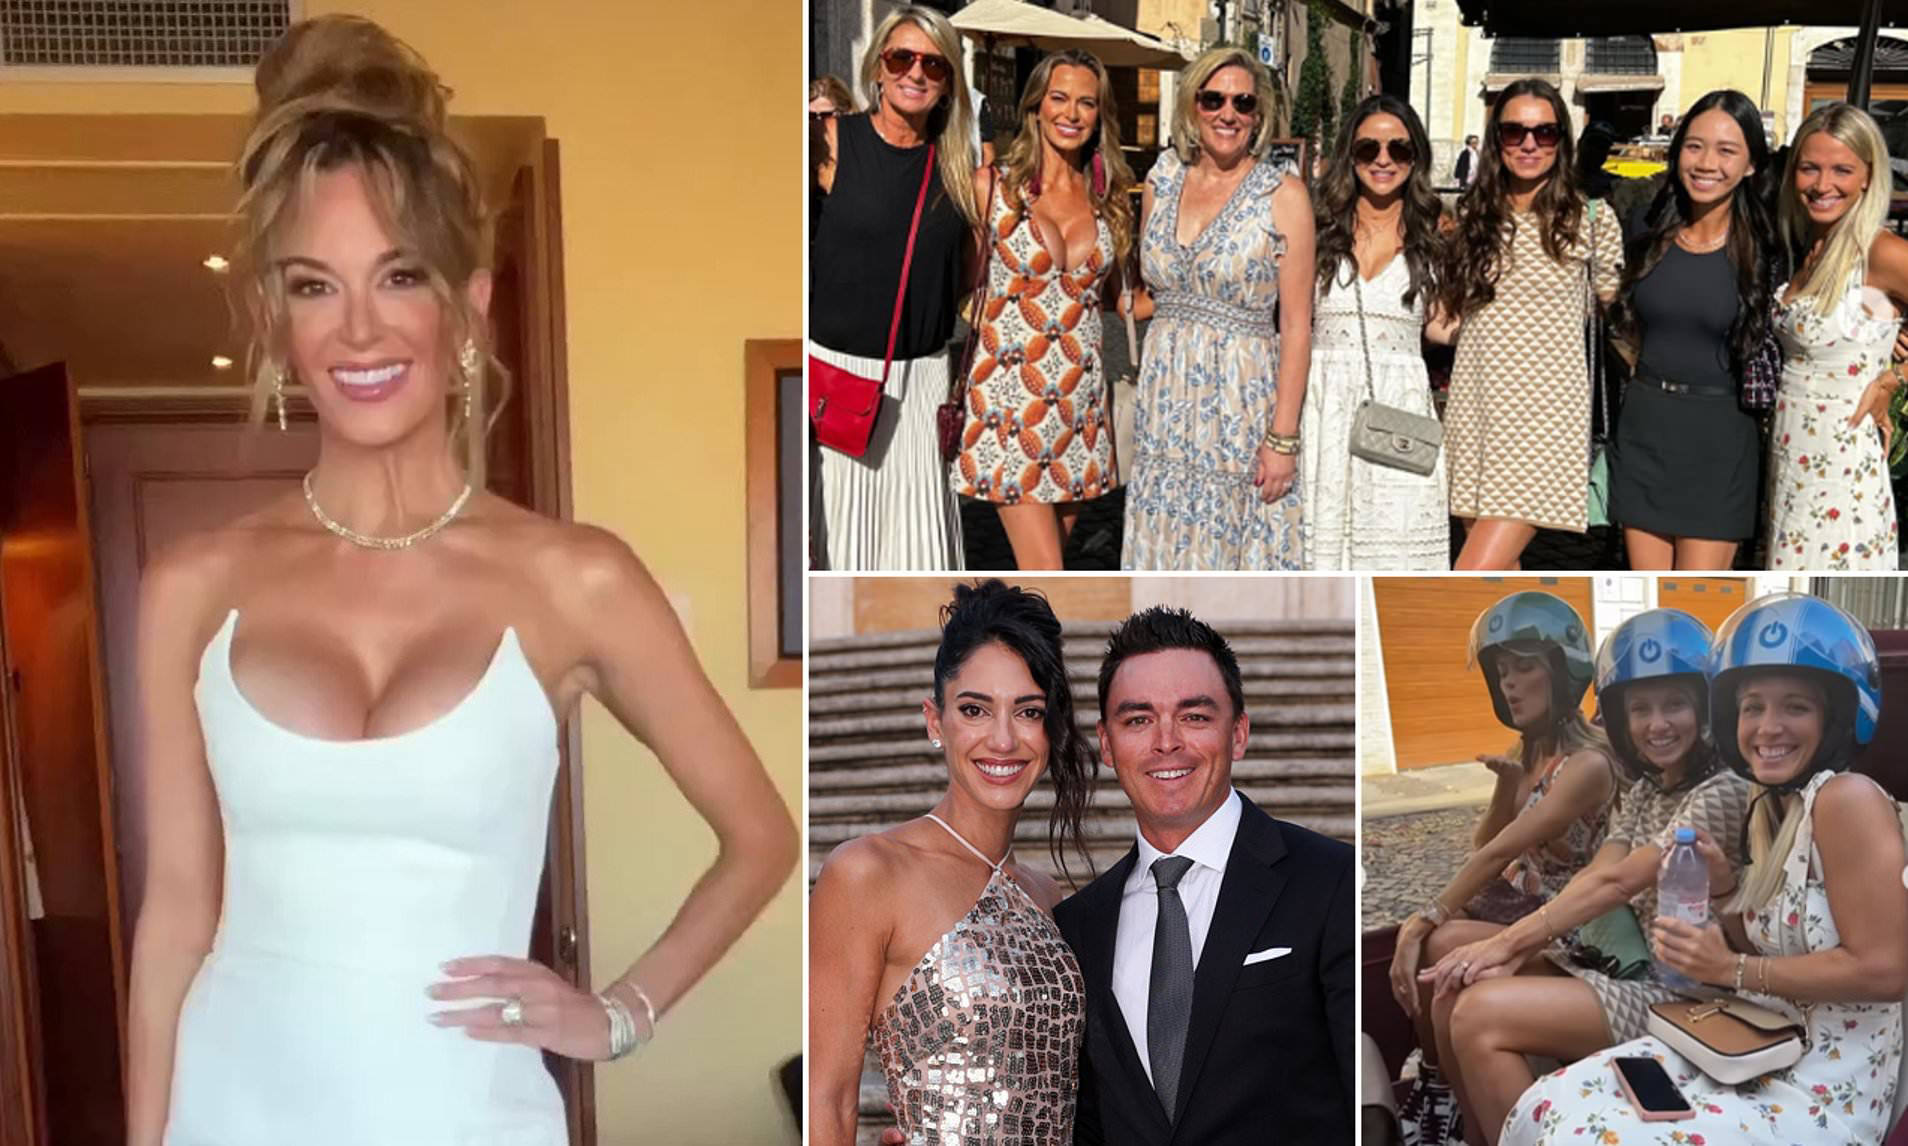 Ryder Cup Team USA WAGs enjoy a day out in Rome